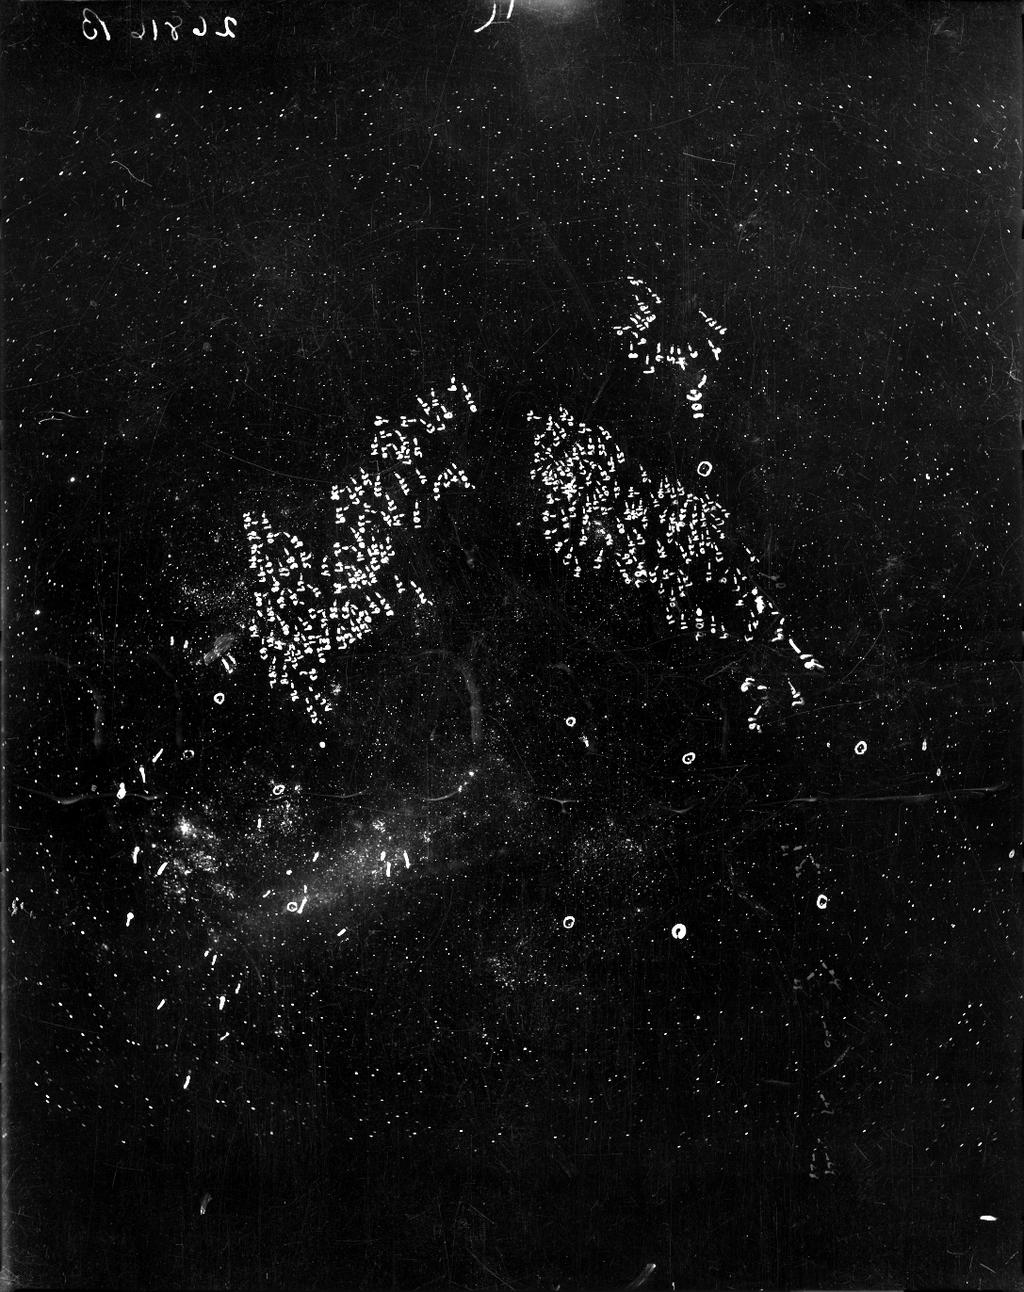 Henrietta Swan Leavitt Photographic Plates Leavitt worked under Pickering to study the variable stars in the Large Magellanic Cloud Plate b26816 of Large Magellanic Cloud taken on December 18, 1900